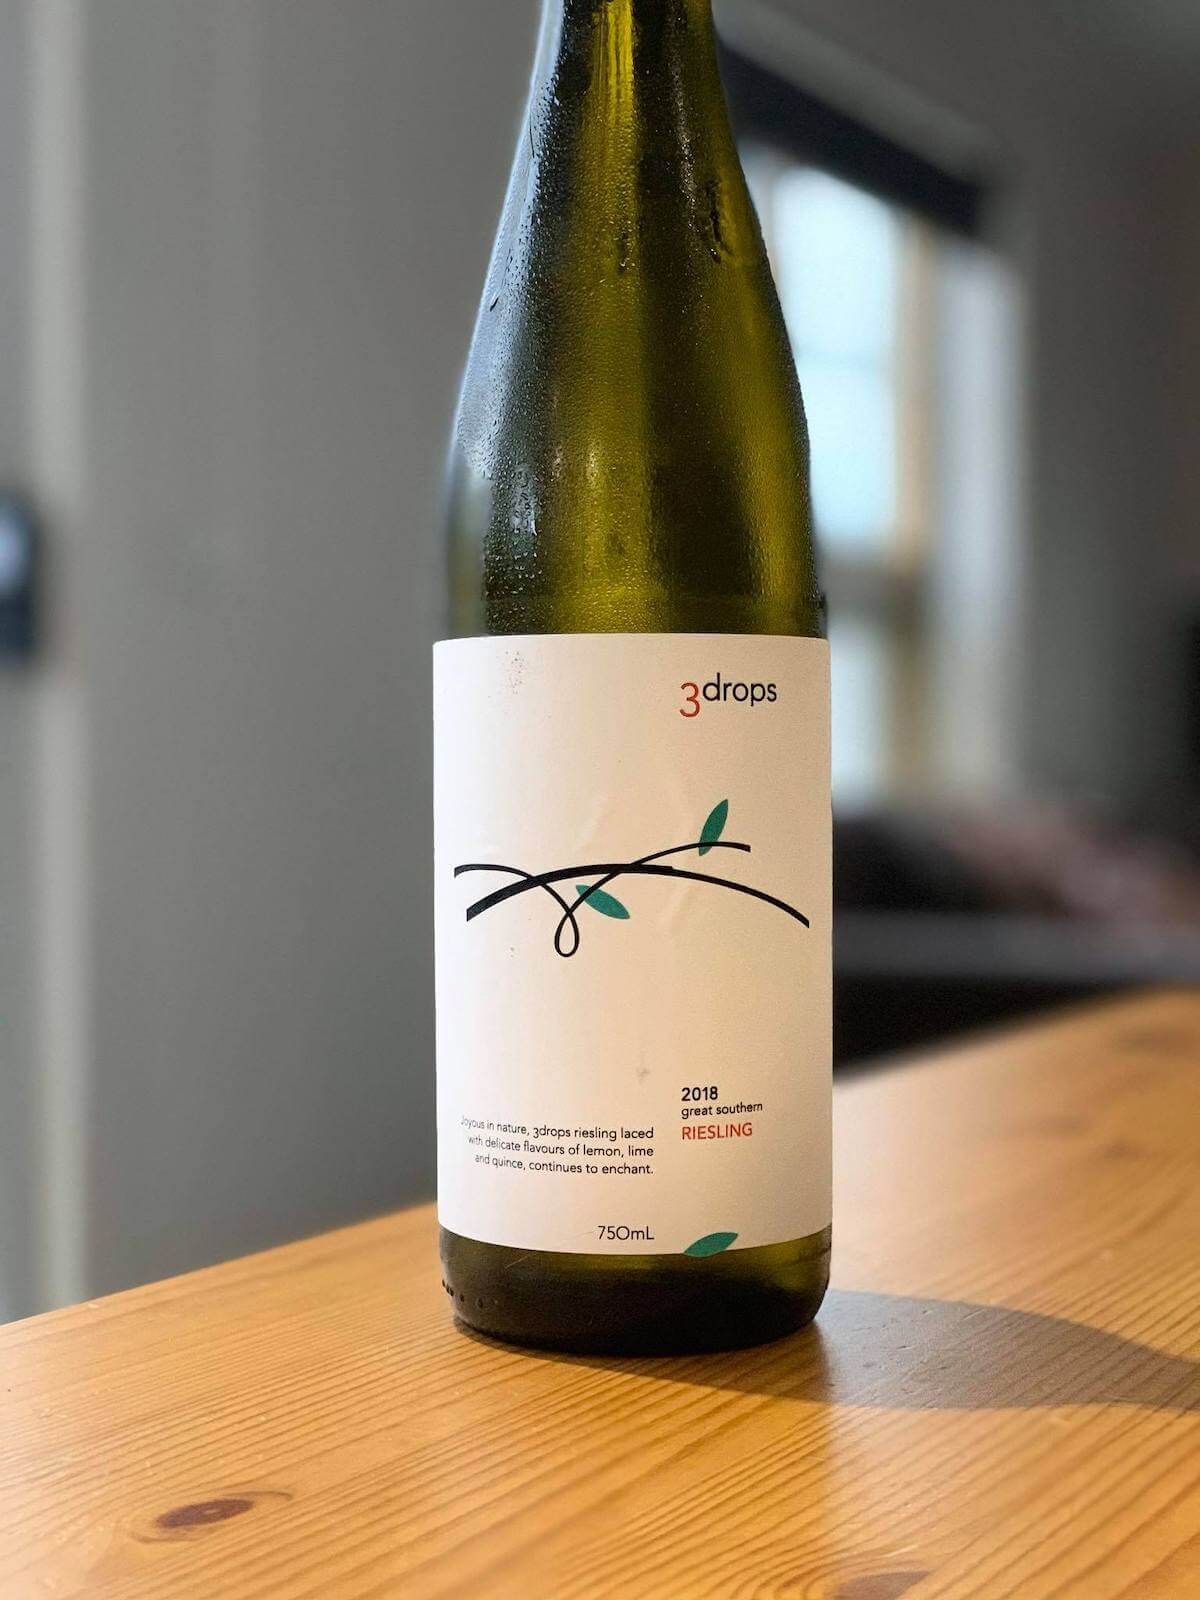 3drops 2018 Great Southern Riesling